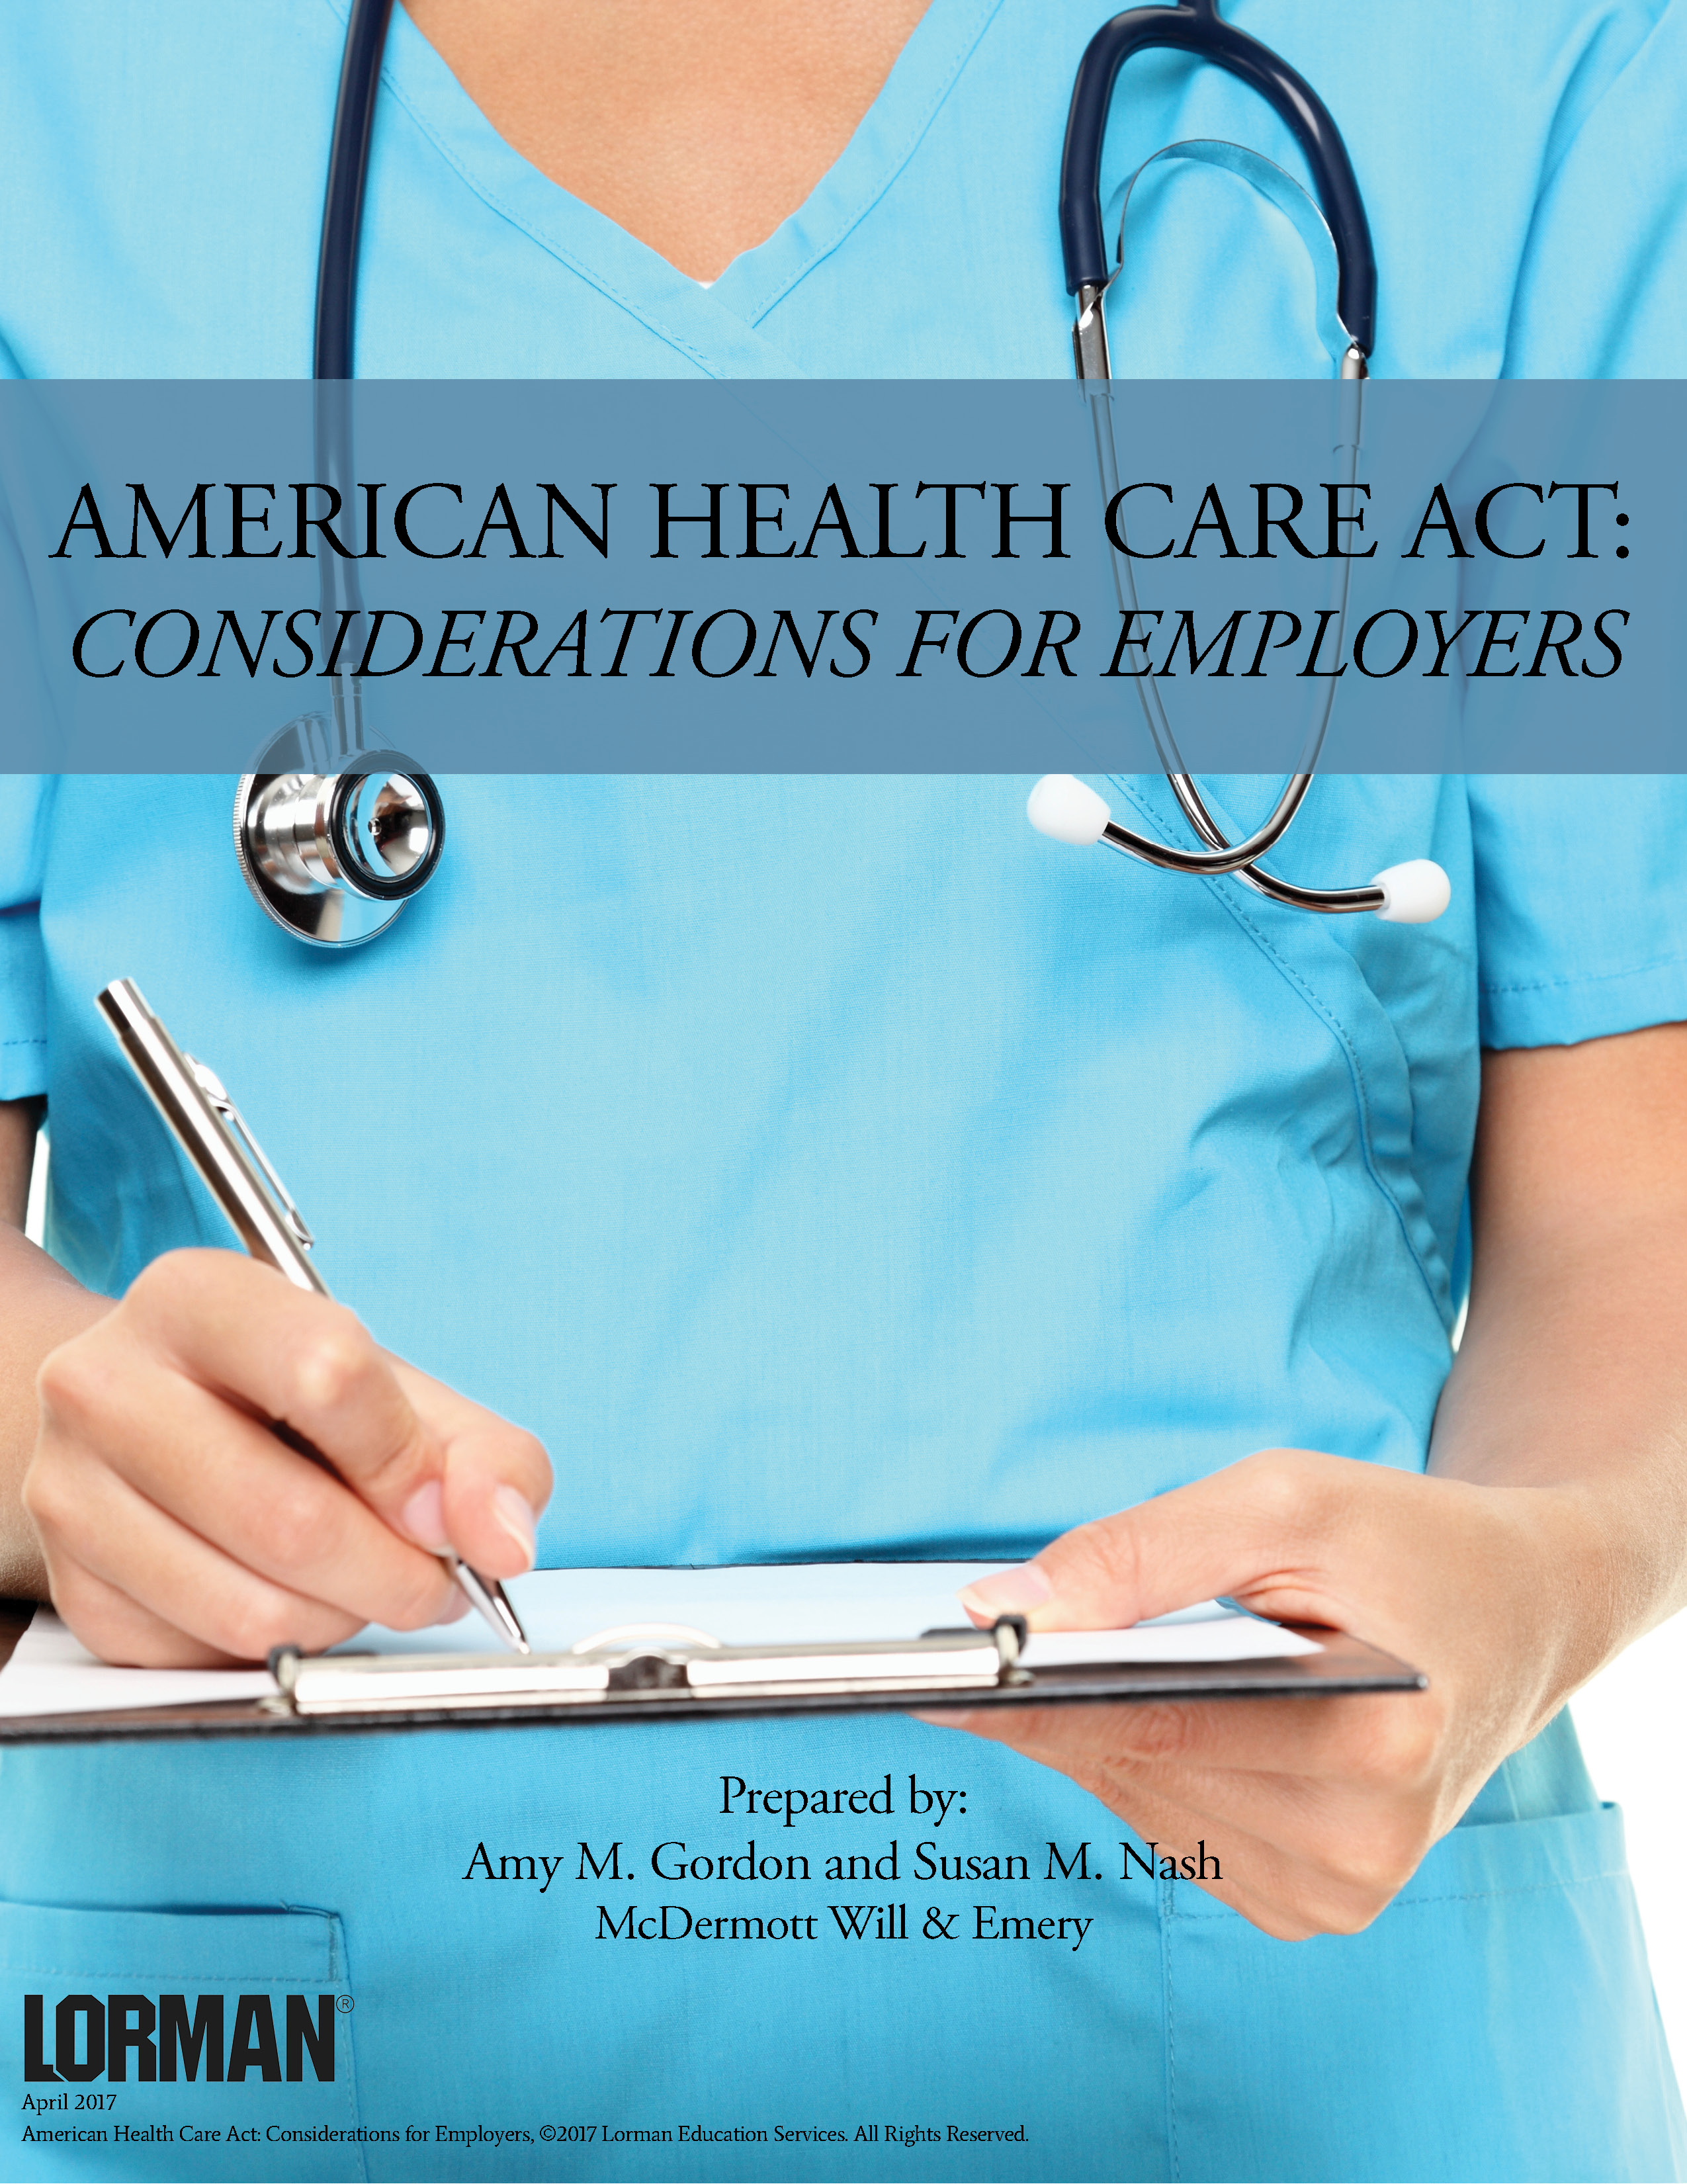 American Health Care Act: Considerations for Employers